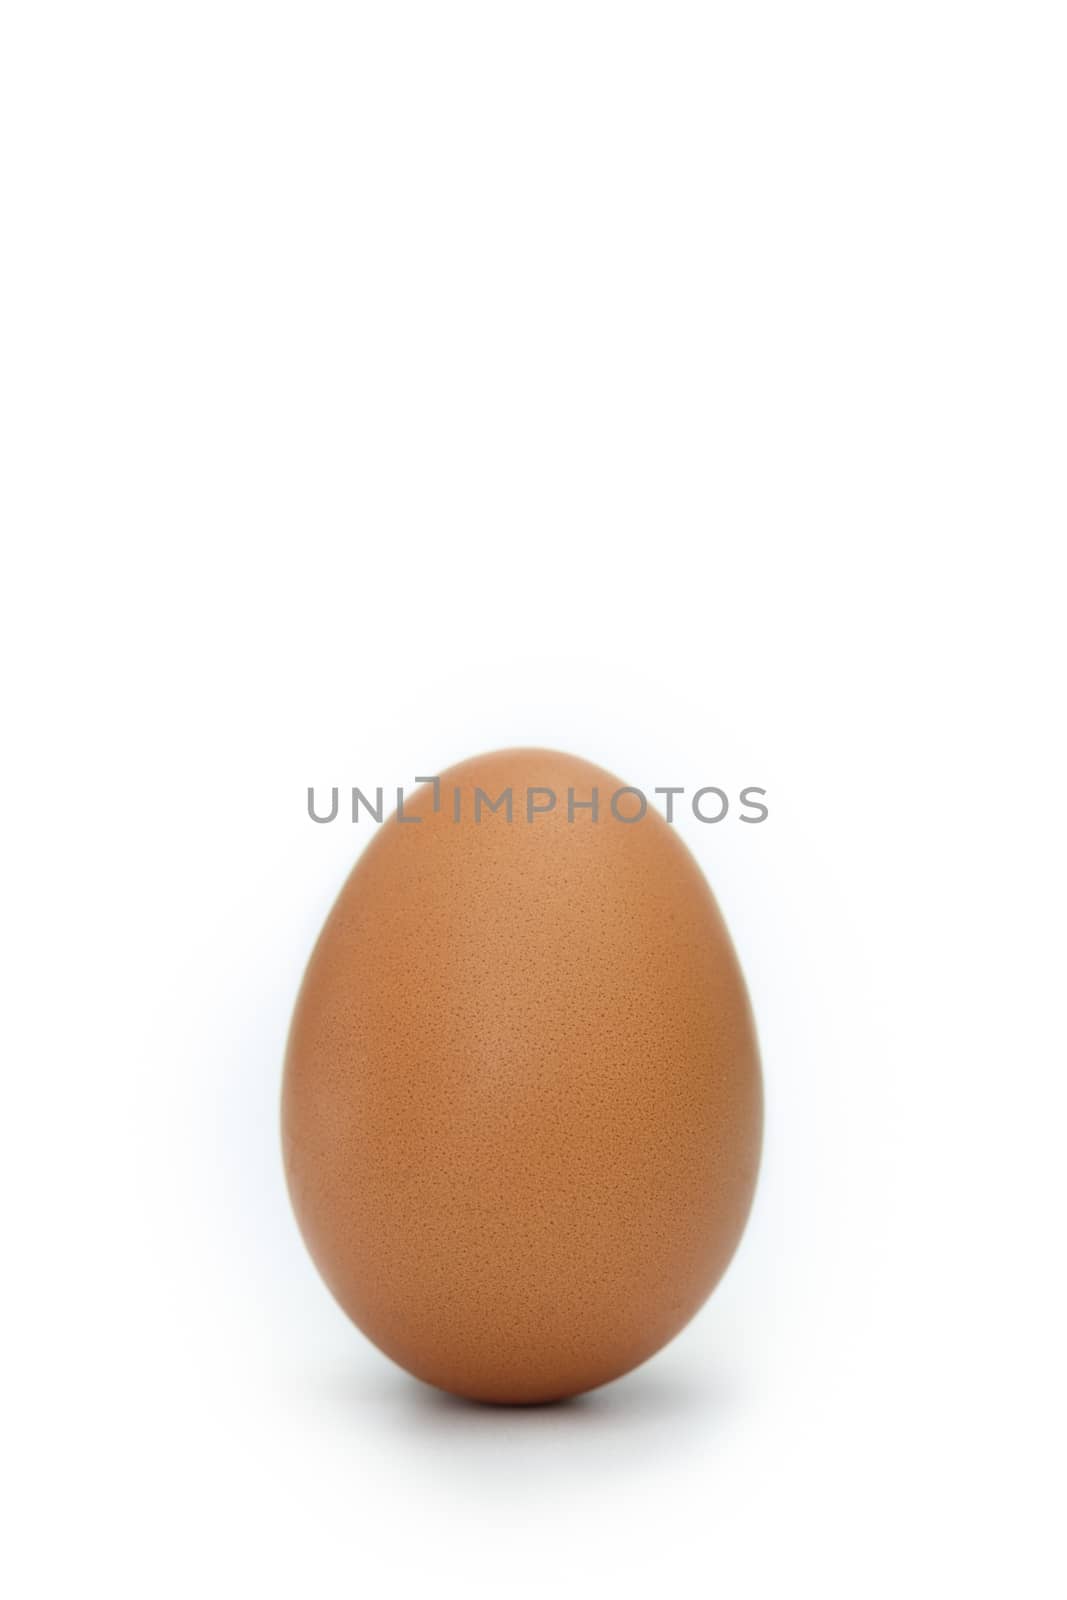 An Eggs isolated on white background, Eggs is beneficial to the body, Food concept.